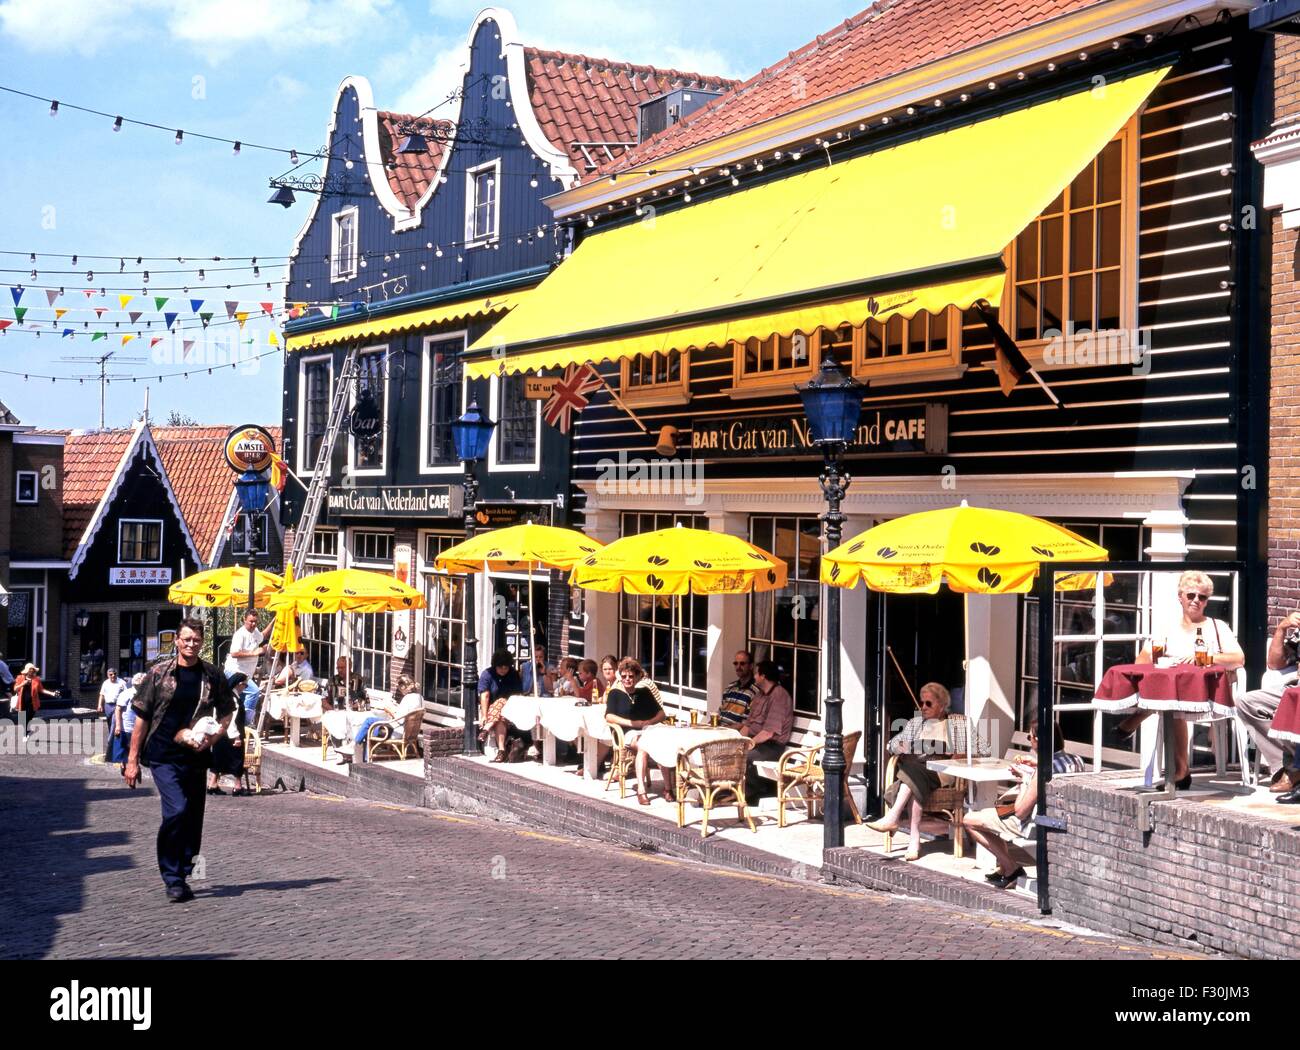 People relaxing at pavement cafes during the Summertime, Volendam, Holland, Netherlands, Europe. Stock Photo